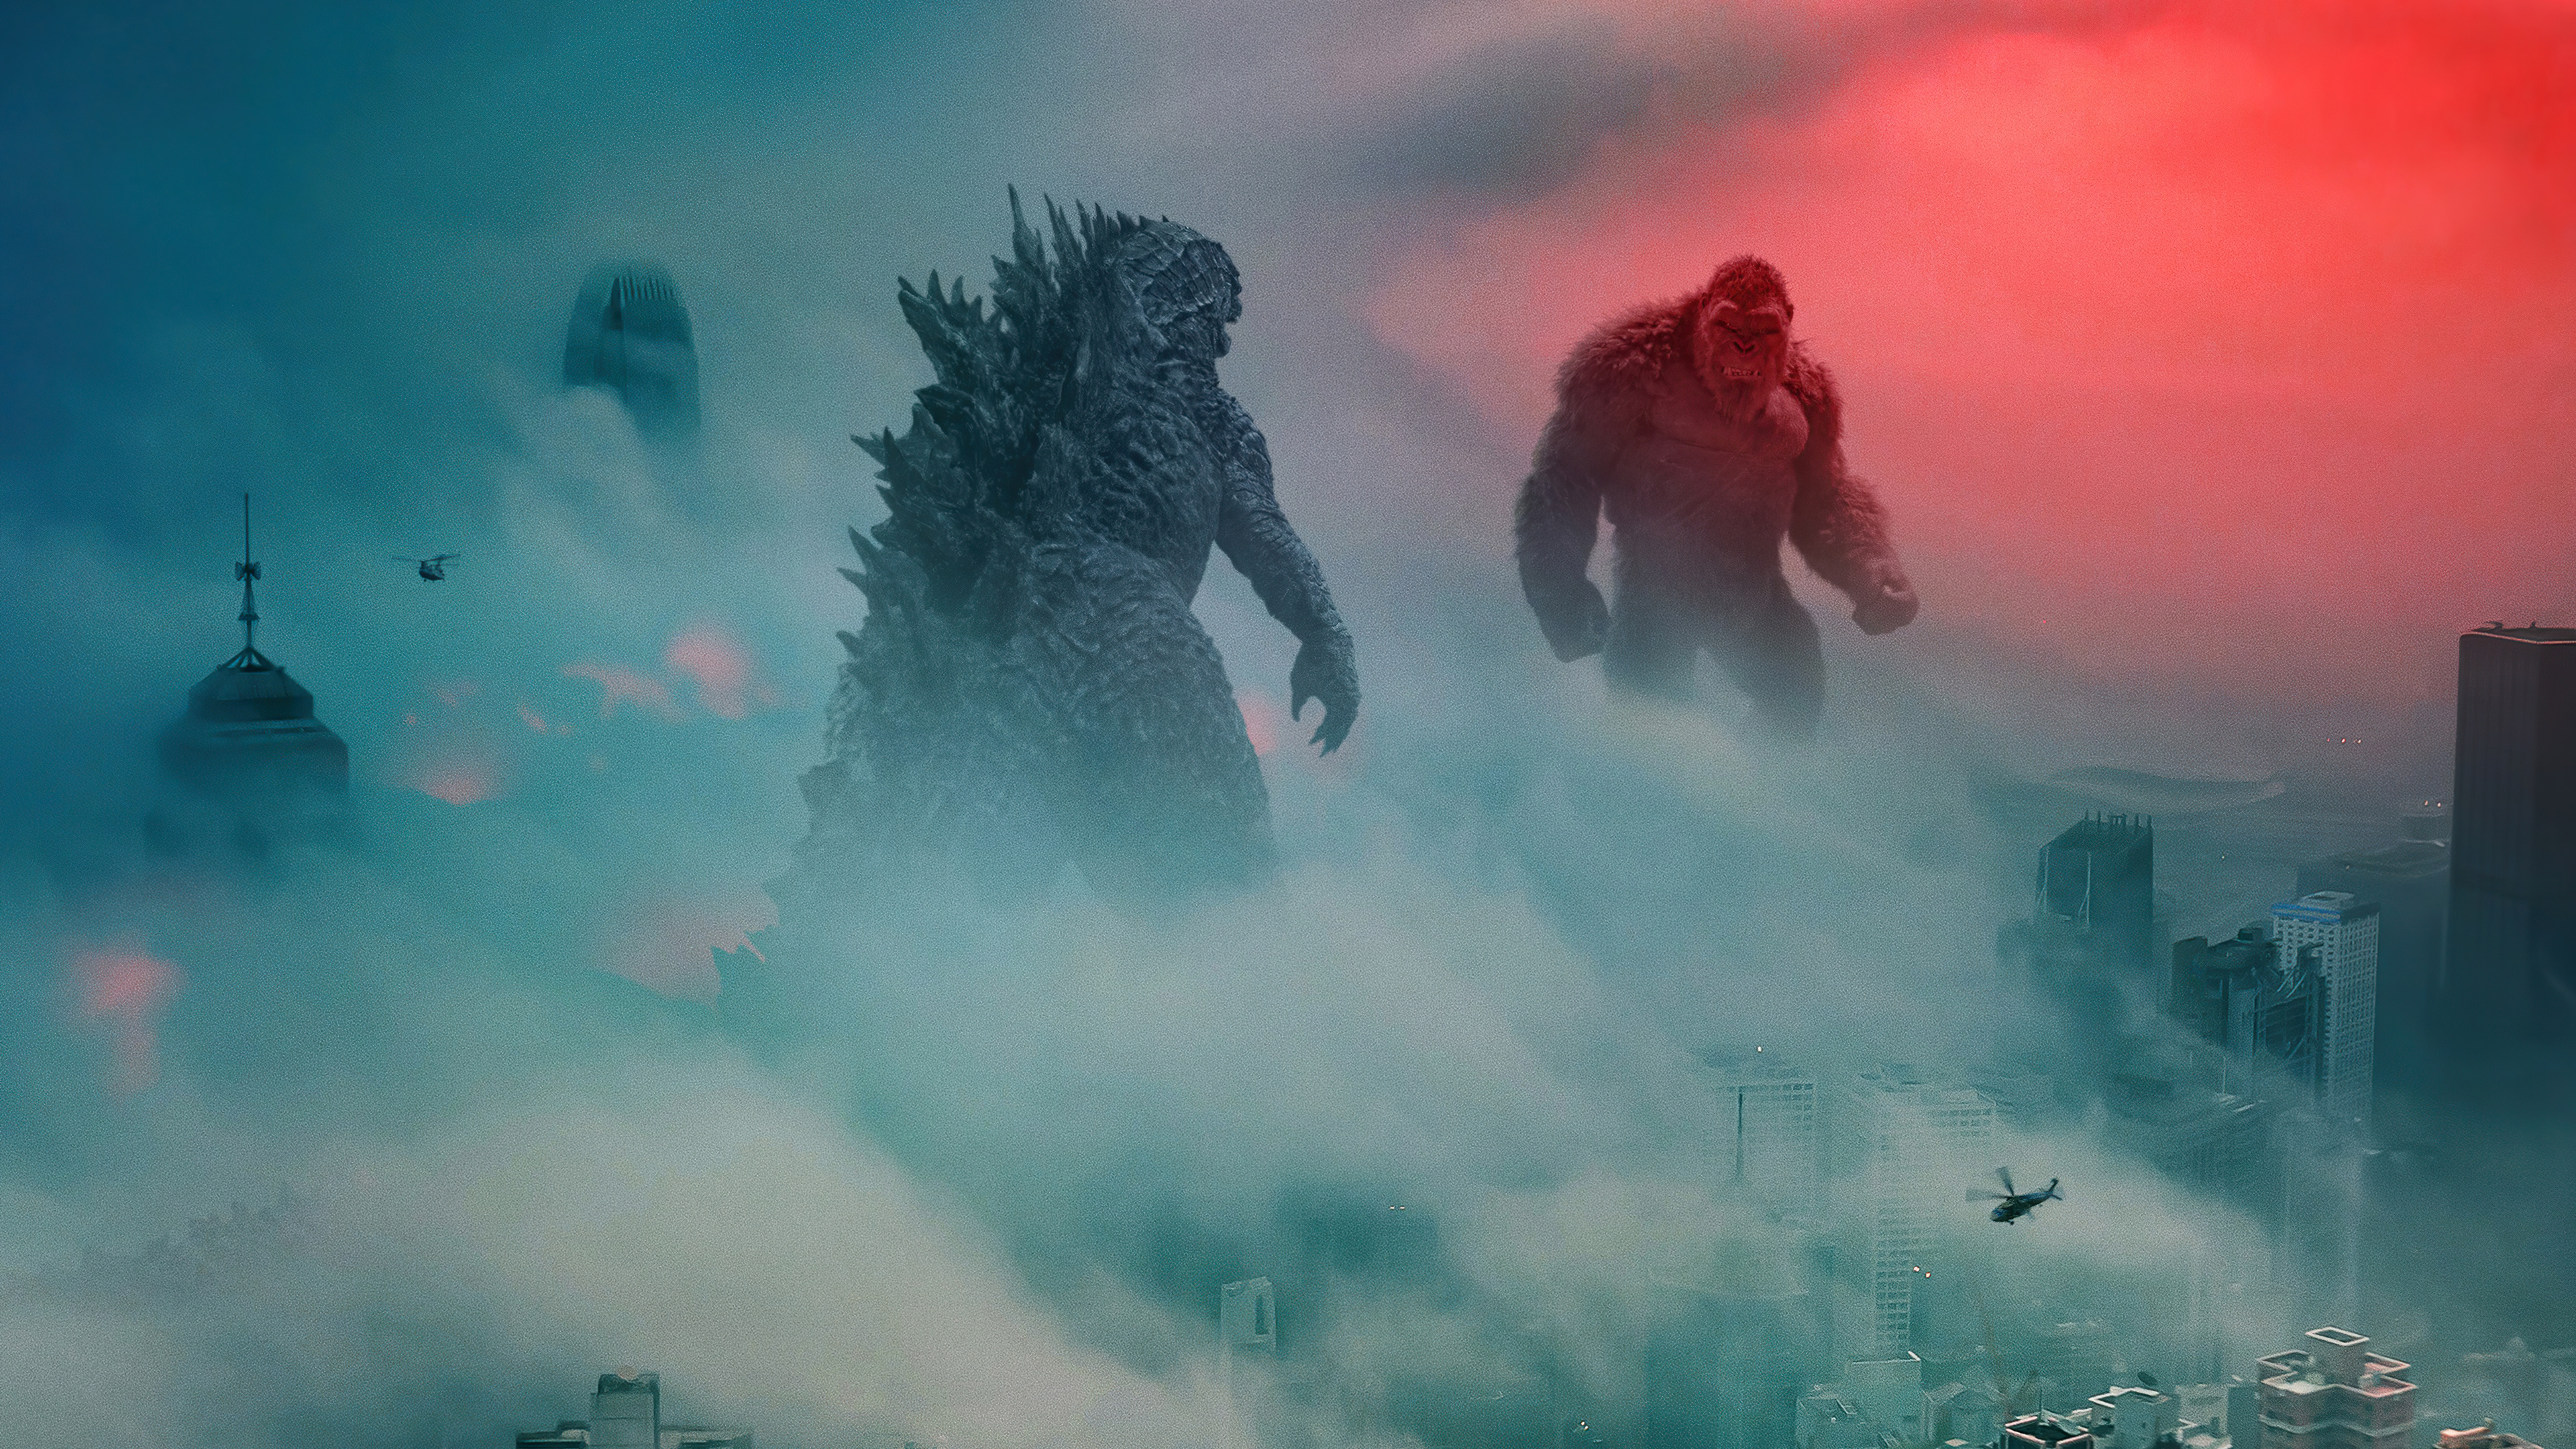 Godzilla: Kong, The fourth film in Legendary Pictures' MonsterVerse. 3840x2160 4K Wallpaper.